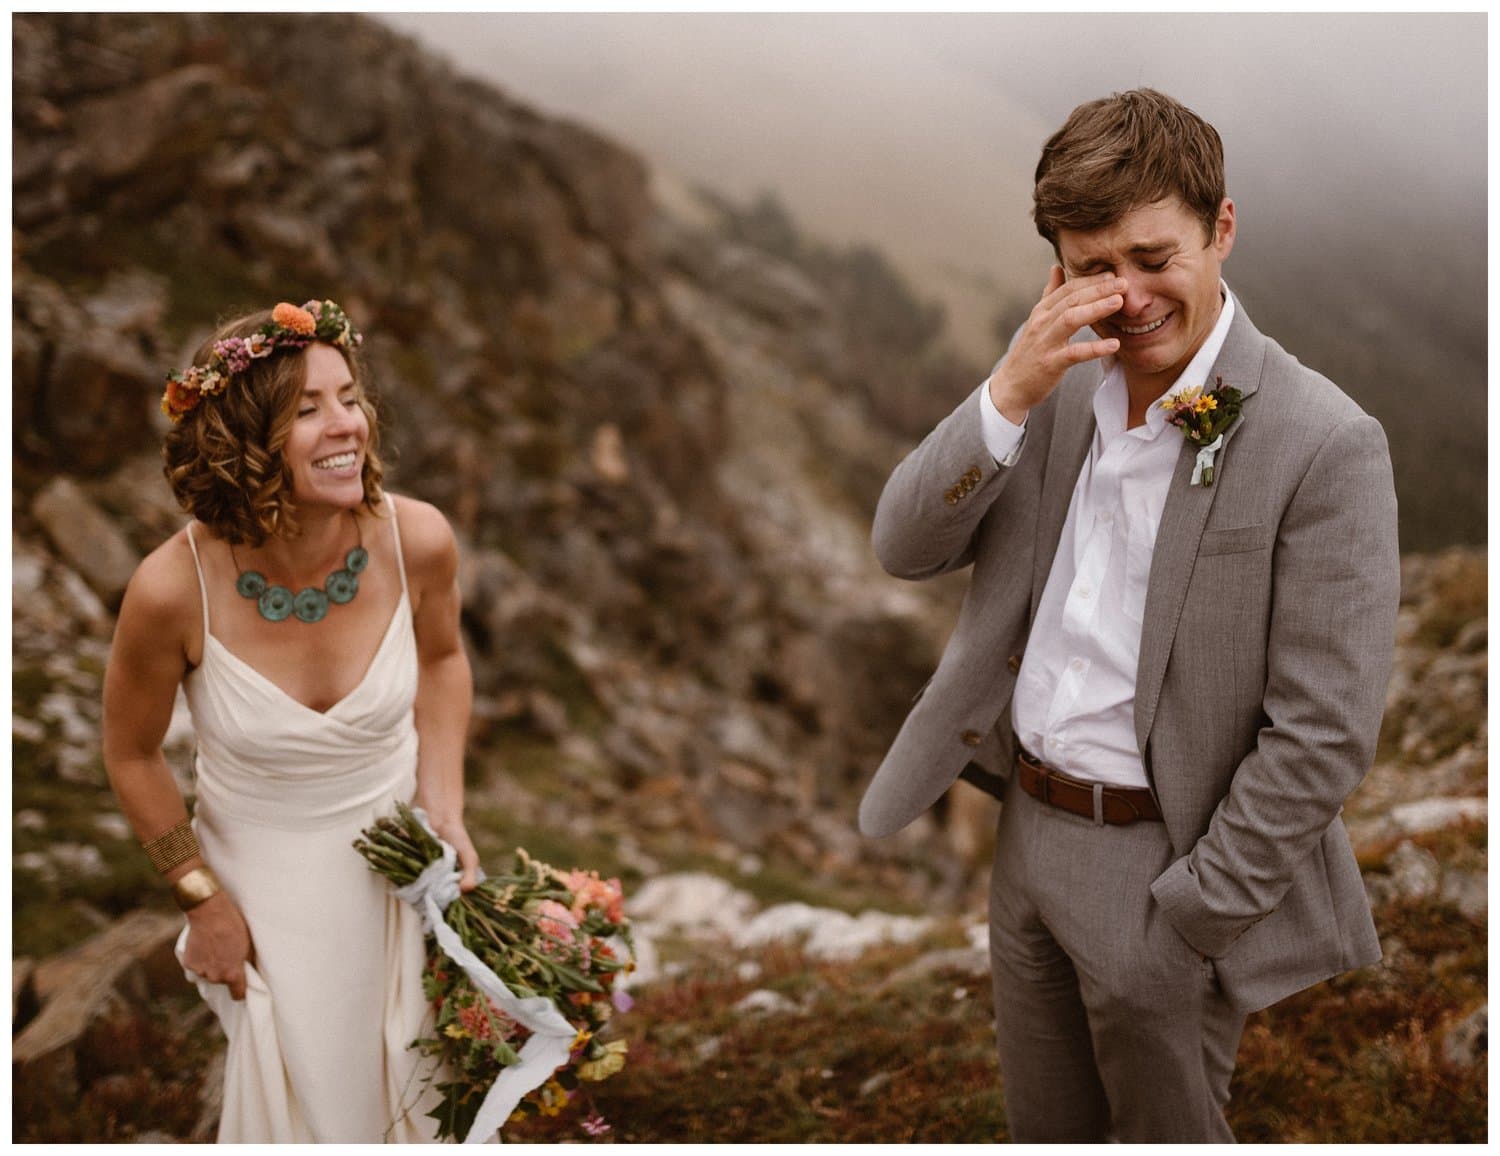 Bride and groom share an emotional first look on their elopement day. The bride is wearing a white dress, holding a bouquet, and wearing a matching flower crown. The groom is wearing a grey suit. 